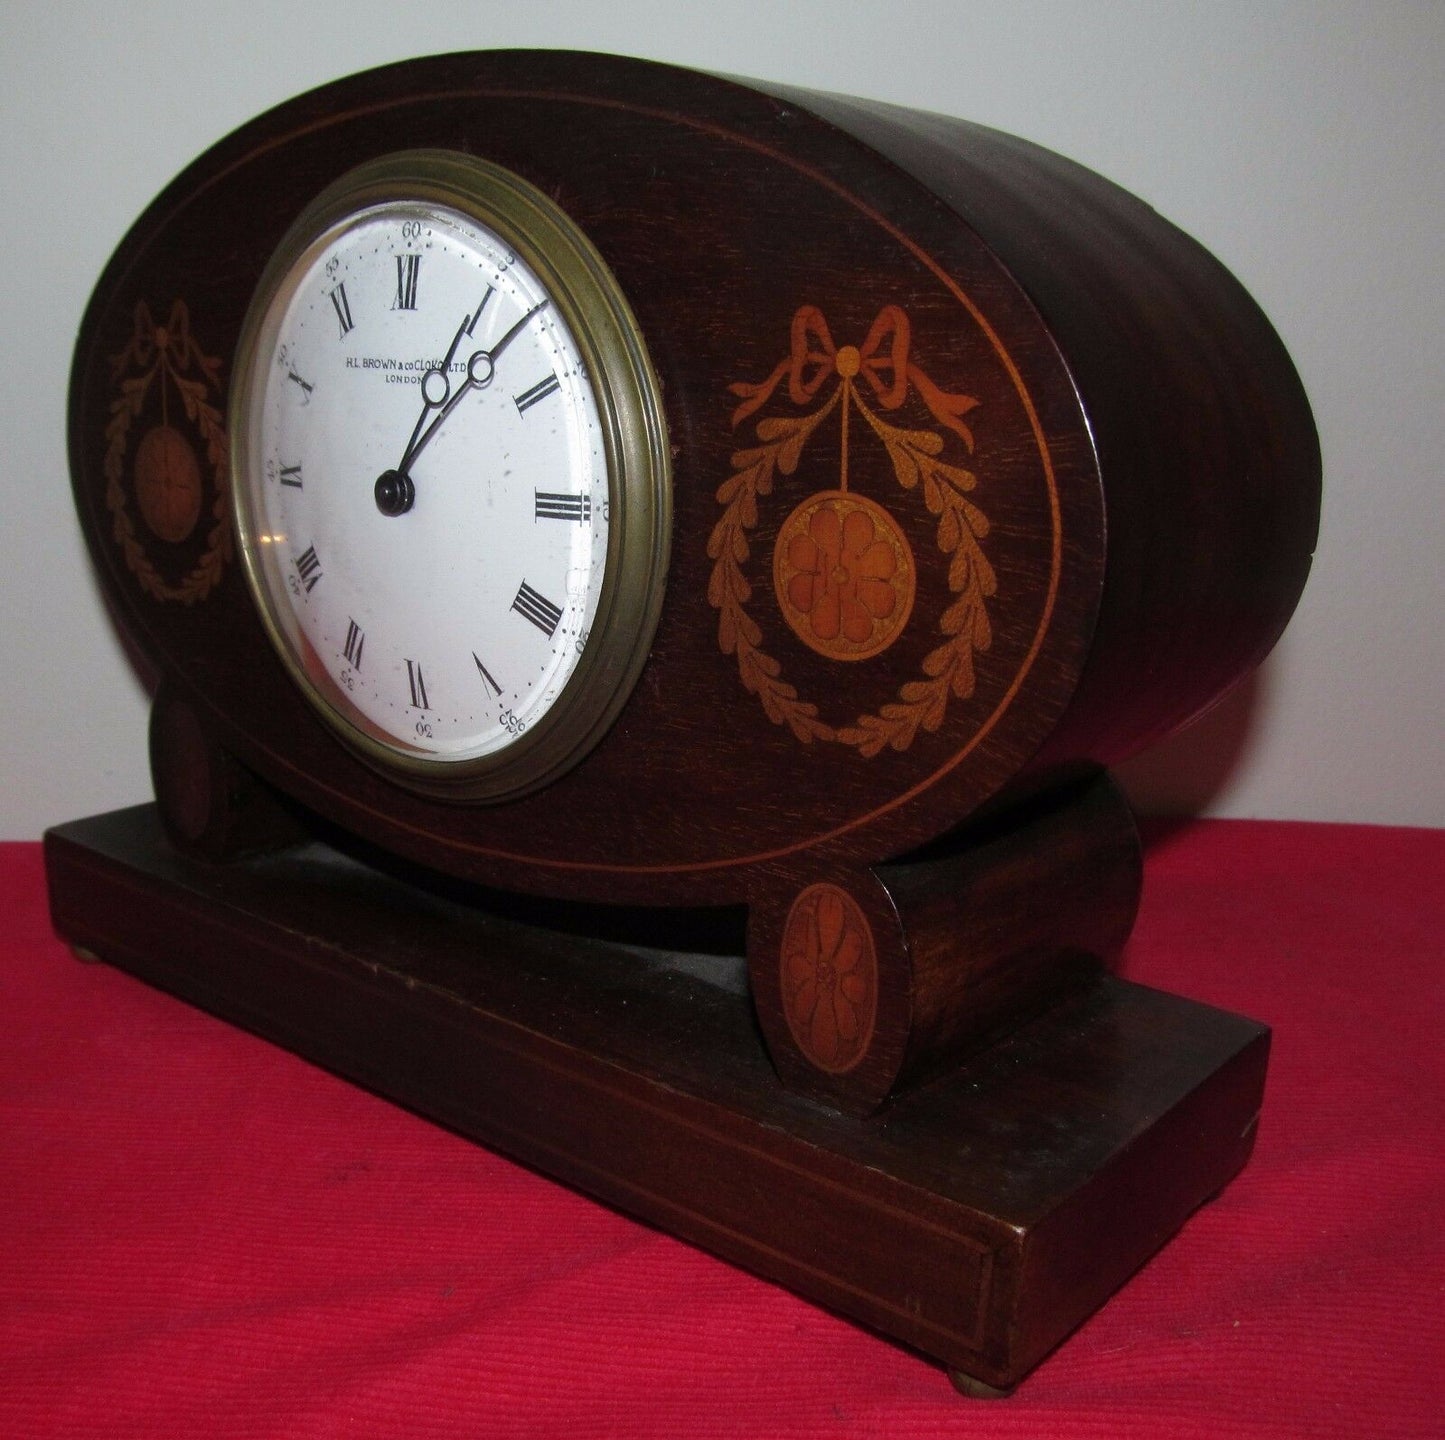 ANTIQUE FINELY INLAID EDWARDIAN MAHOGANY DESK CLOCK BY H. L. BROWN ENGLAND